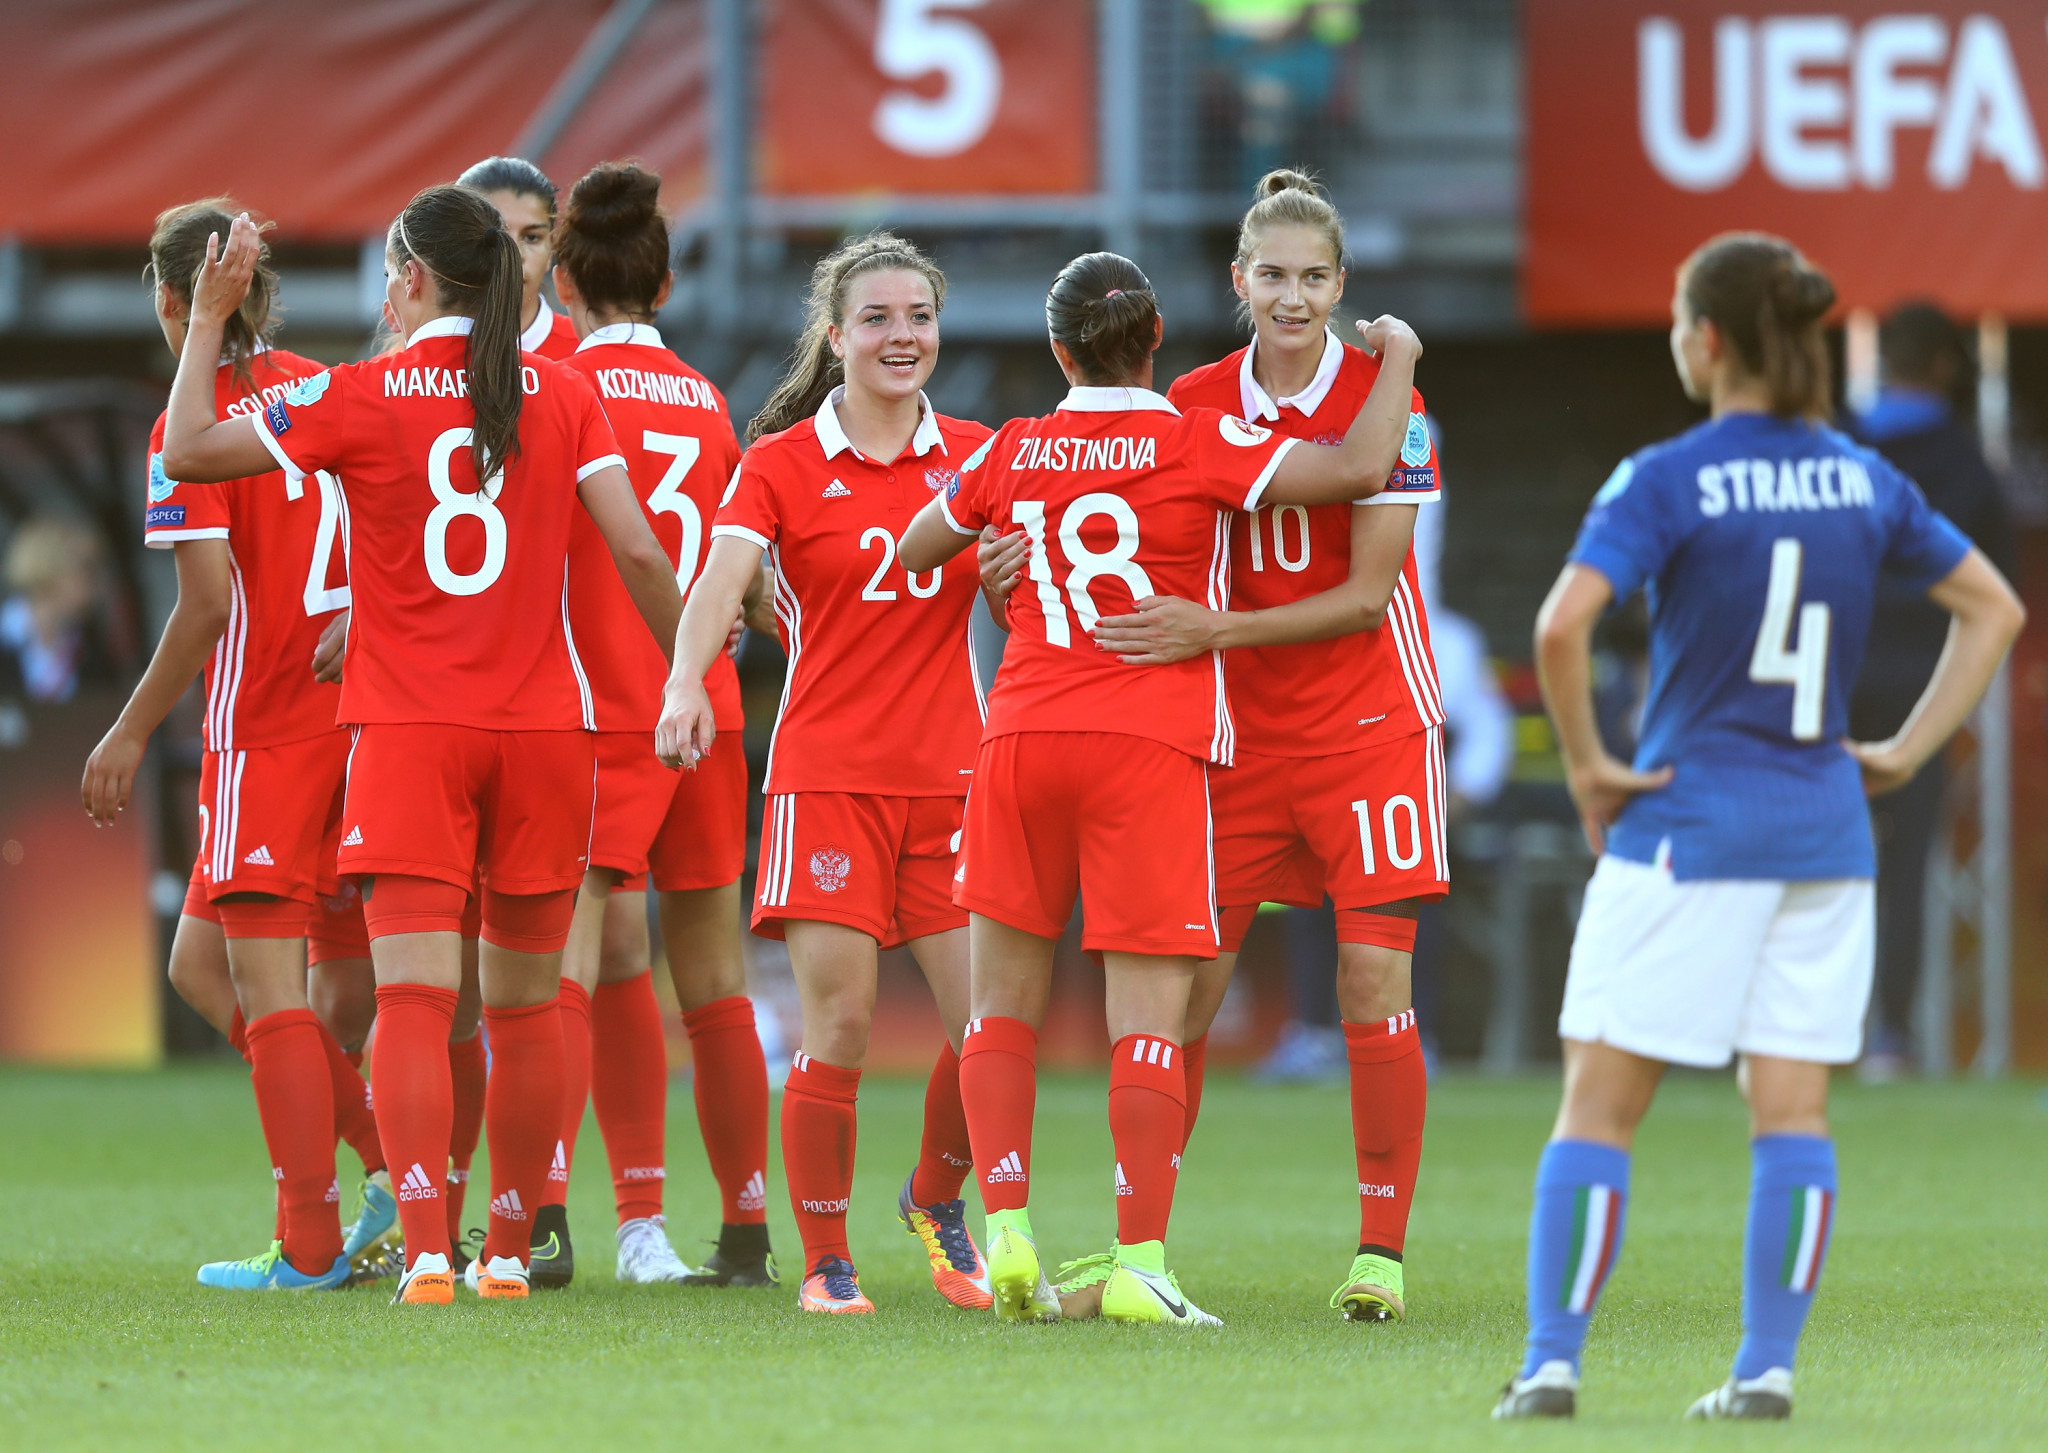 Russia accepted to compete at SAFF Under-17 Women's Championship